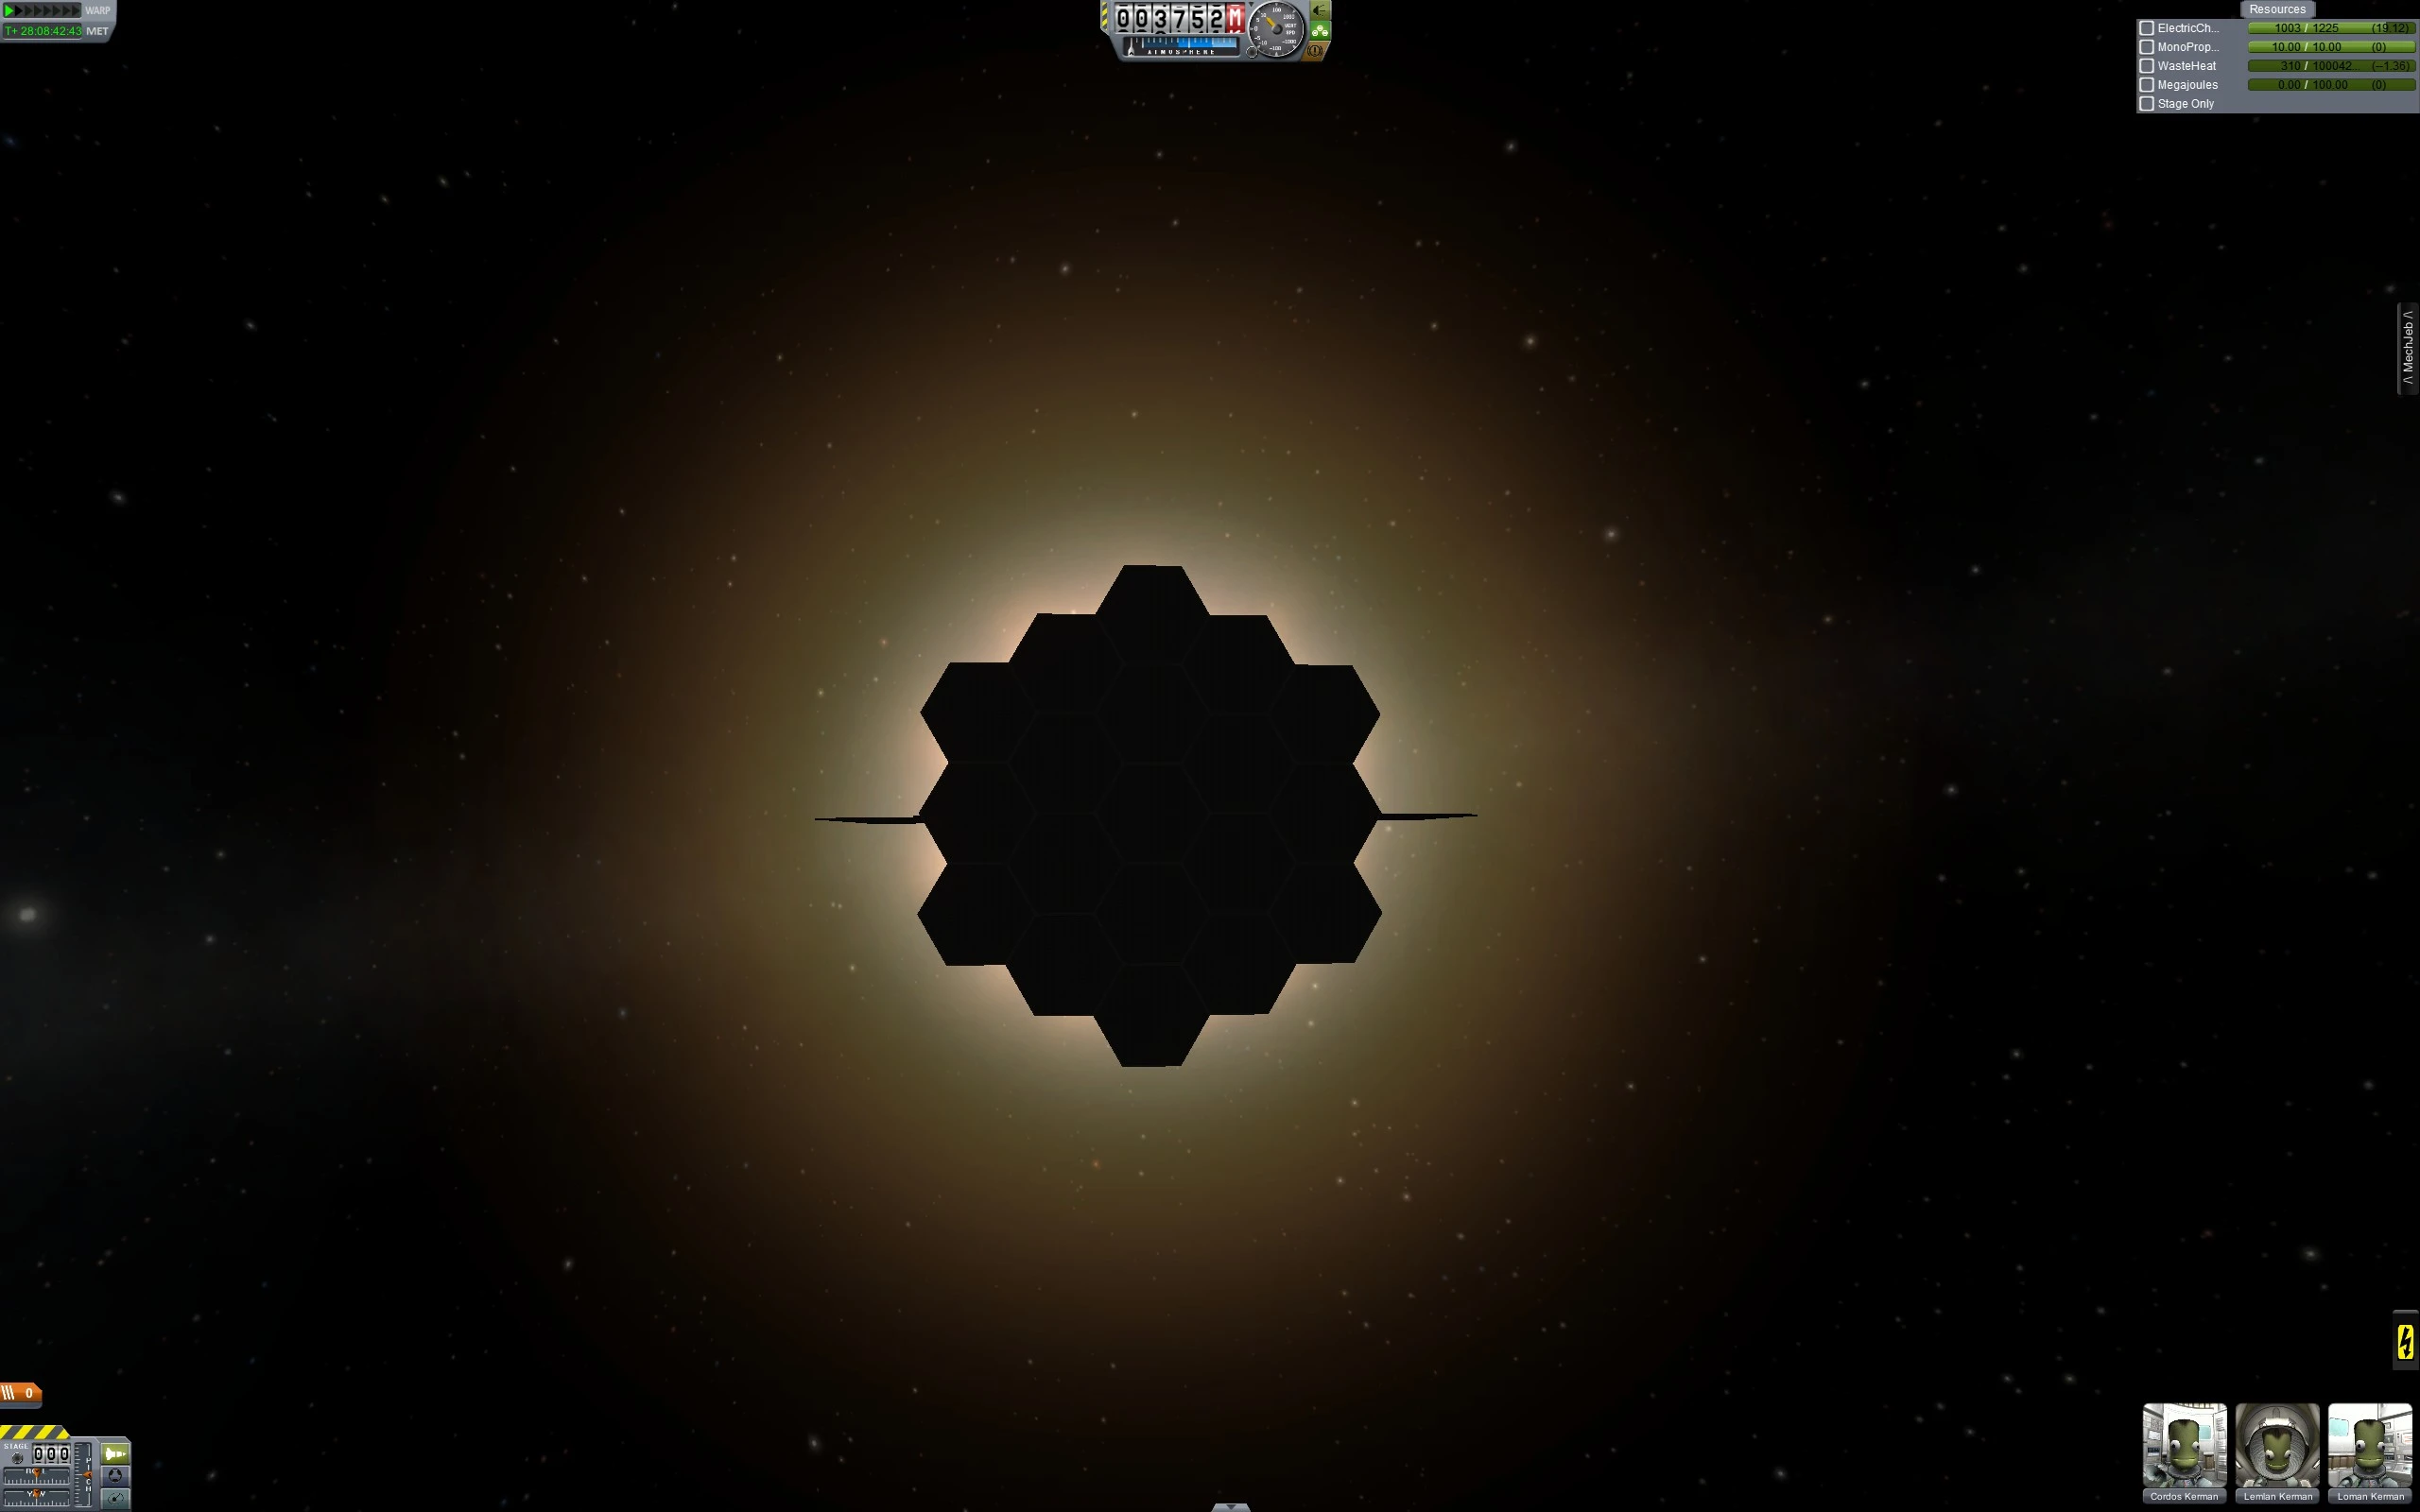 Total eclipse of the station